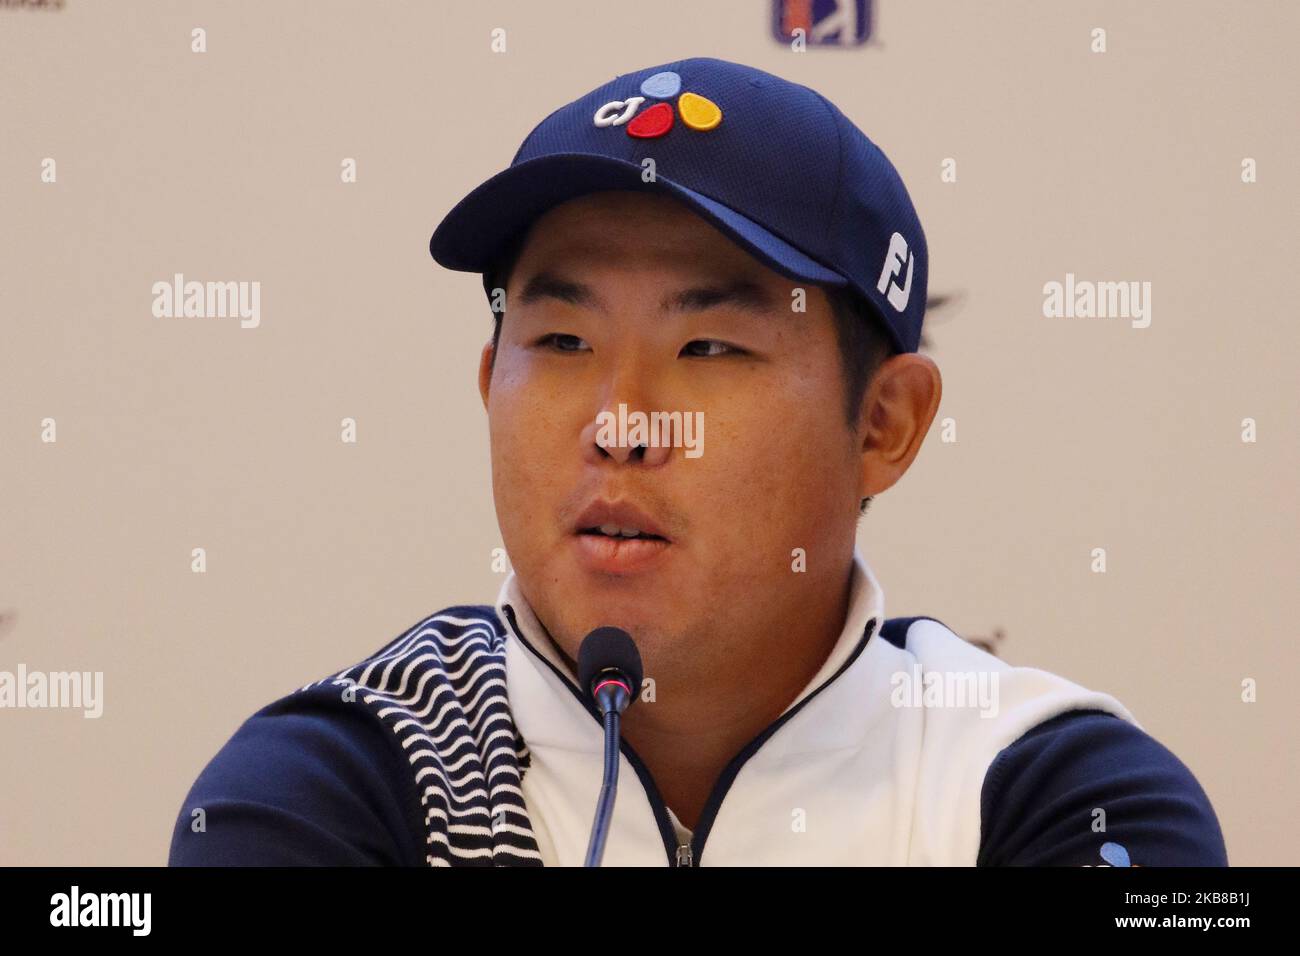 Byeong Hun Ahn of South Korea attend official interview at media center of Nine Bridge golf Club in Jeju, South Korea, on October 15, 2019. The CJ Cup Nine Bridges is every October held on PGA Tour Match. (Photo by Seung-il Ryu/NurPhoto) Stock Photo